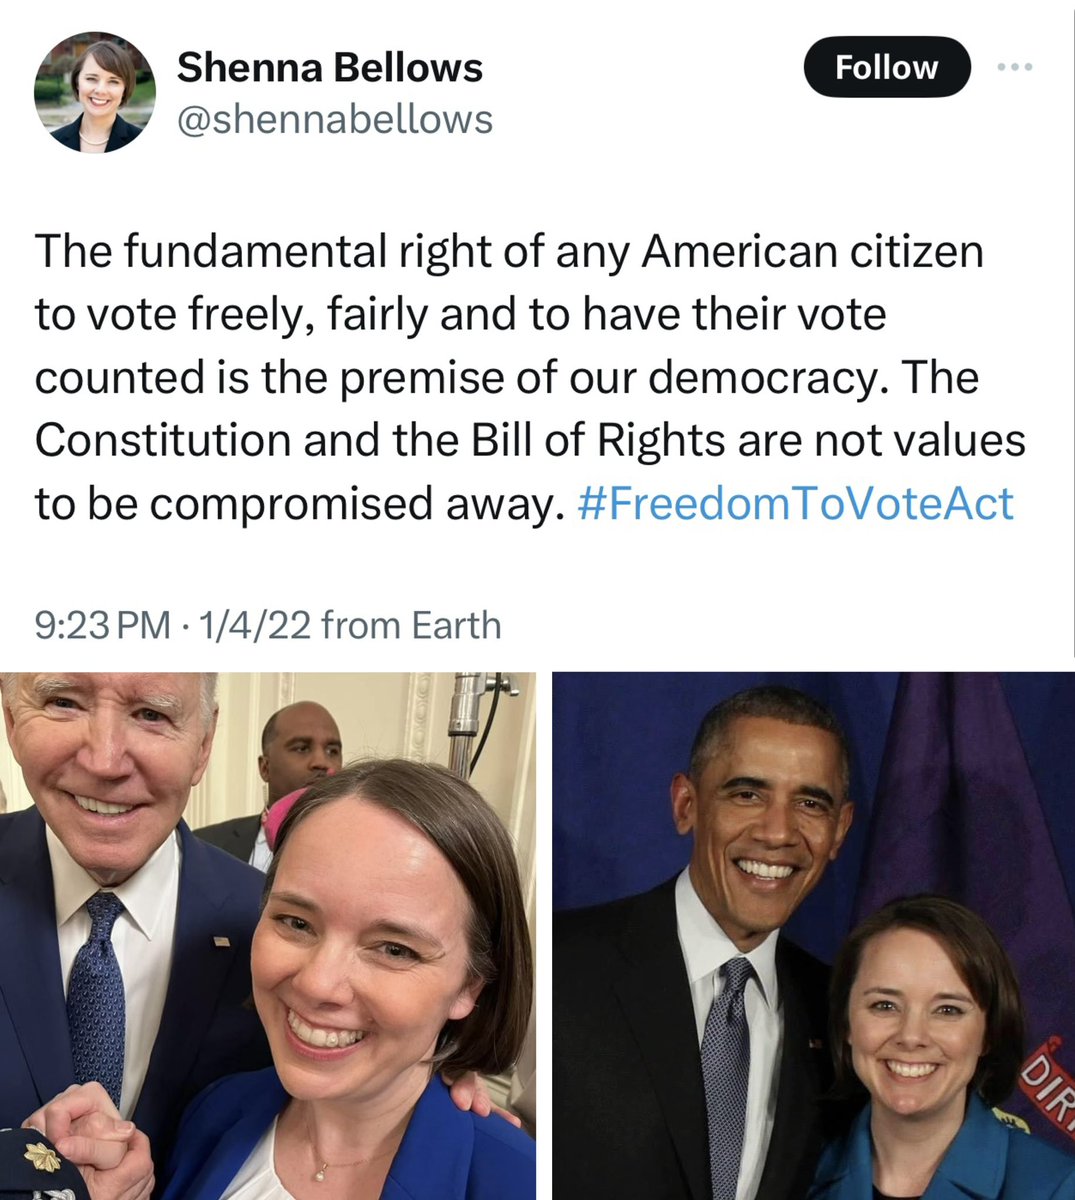 This is Shenna Bellows, the Maine Secretary of State who just removed Trump from the ballot. She said the right of every American to vote freely and fairly is the premise of our democracy. By her own standards, she is the real threat to our democracy!